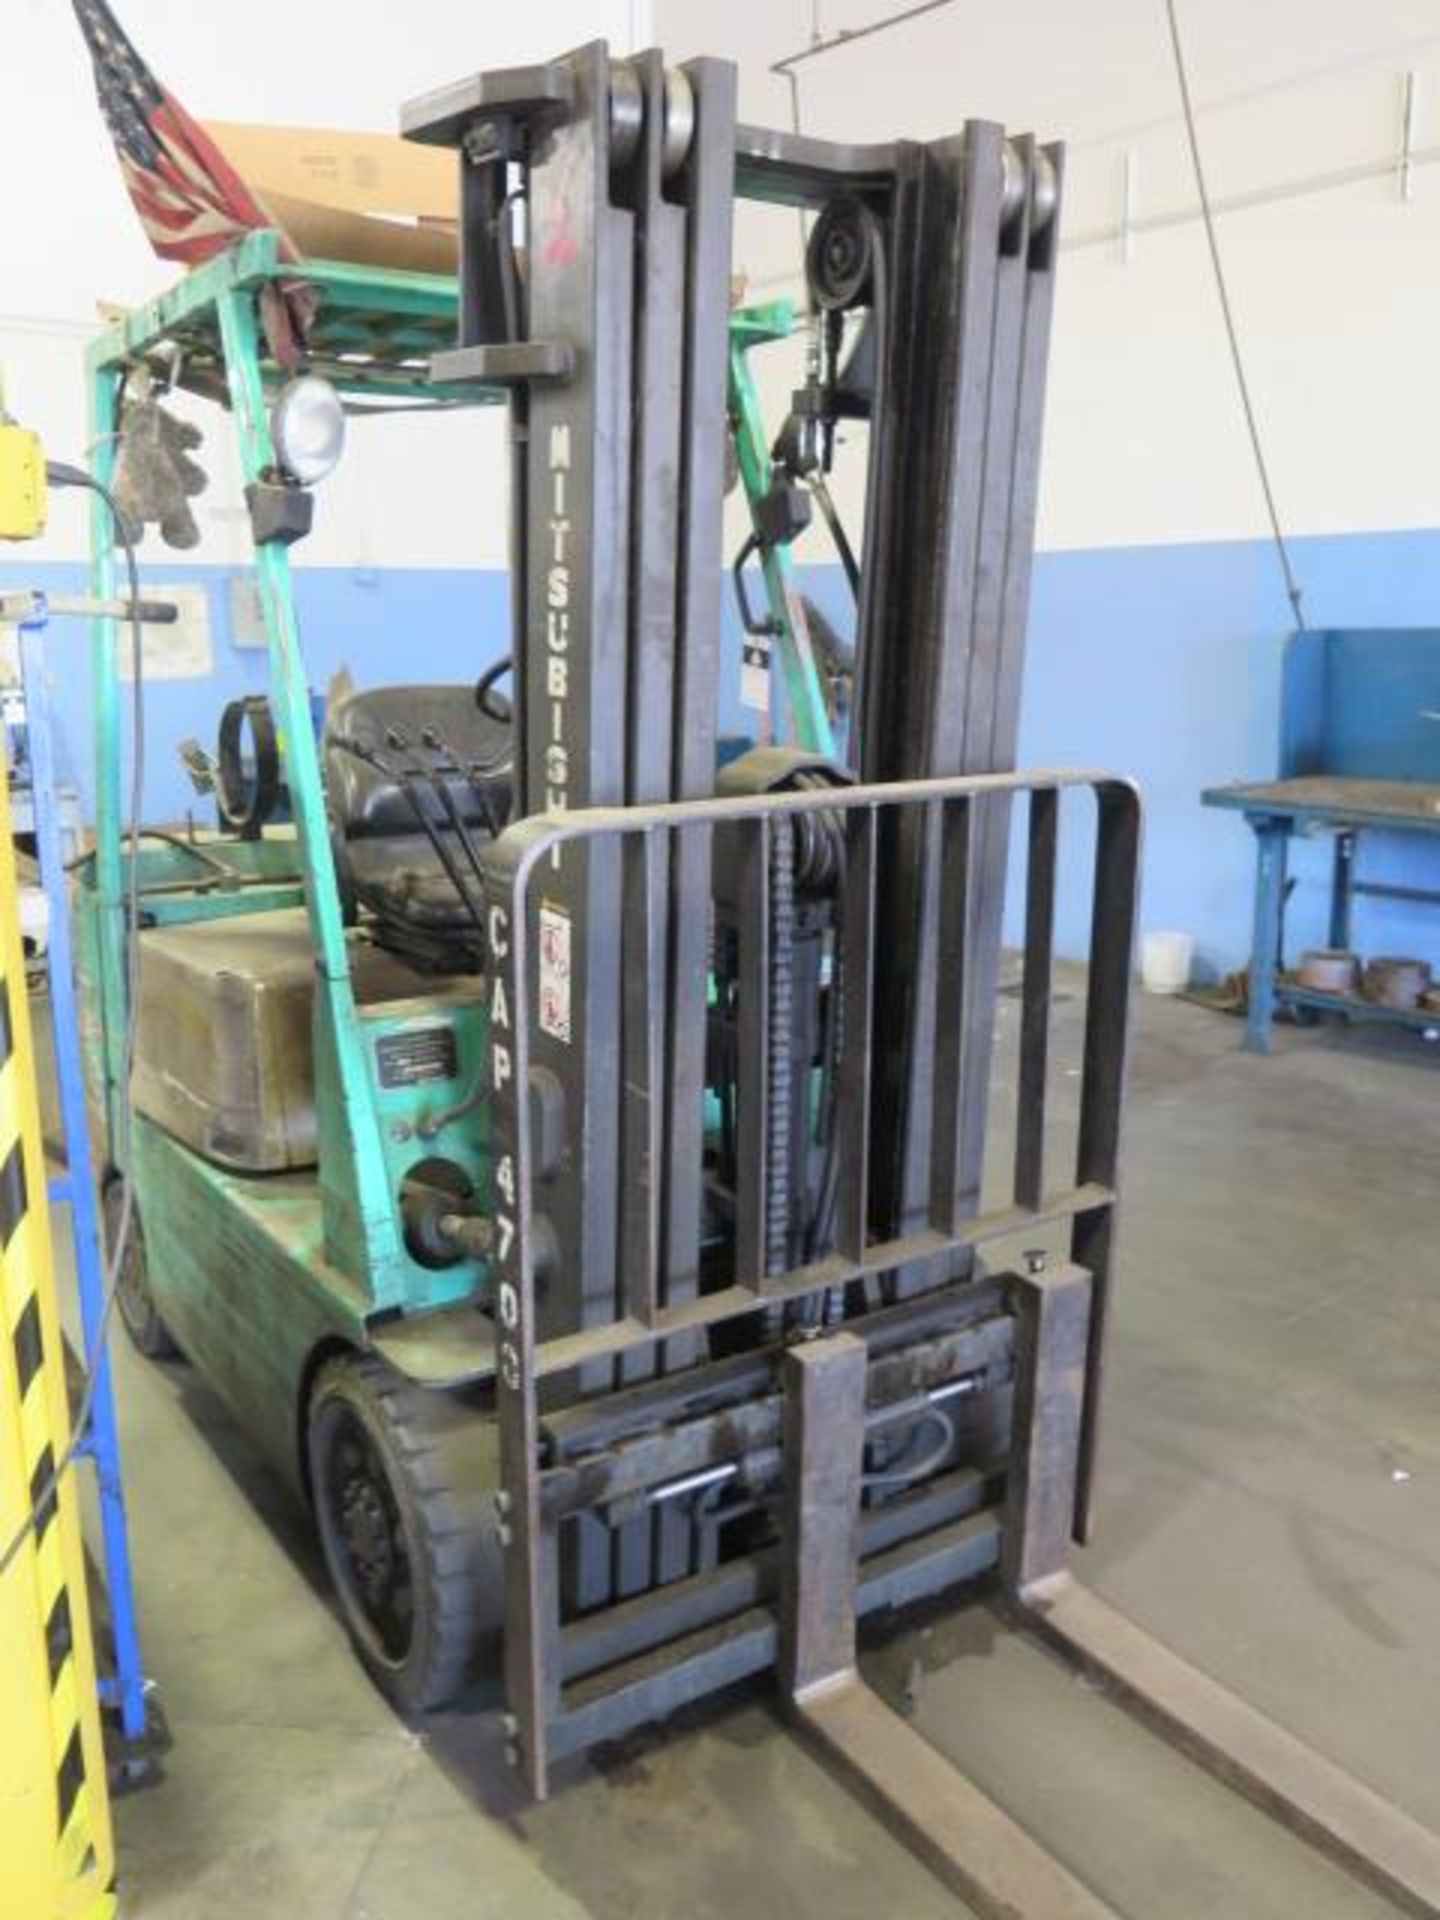 Mitsubishi FGC25 5000 Lb Cap LPG Forklift s/n AF82B-06249 w/ 3-Stage, 198" Lift Height, SOLD AS IS - Image 3 of 12